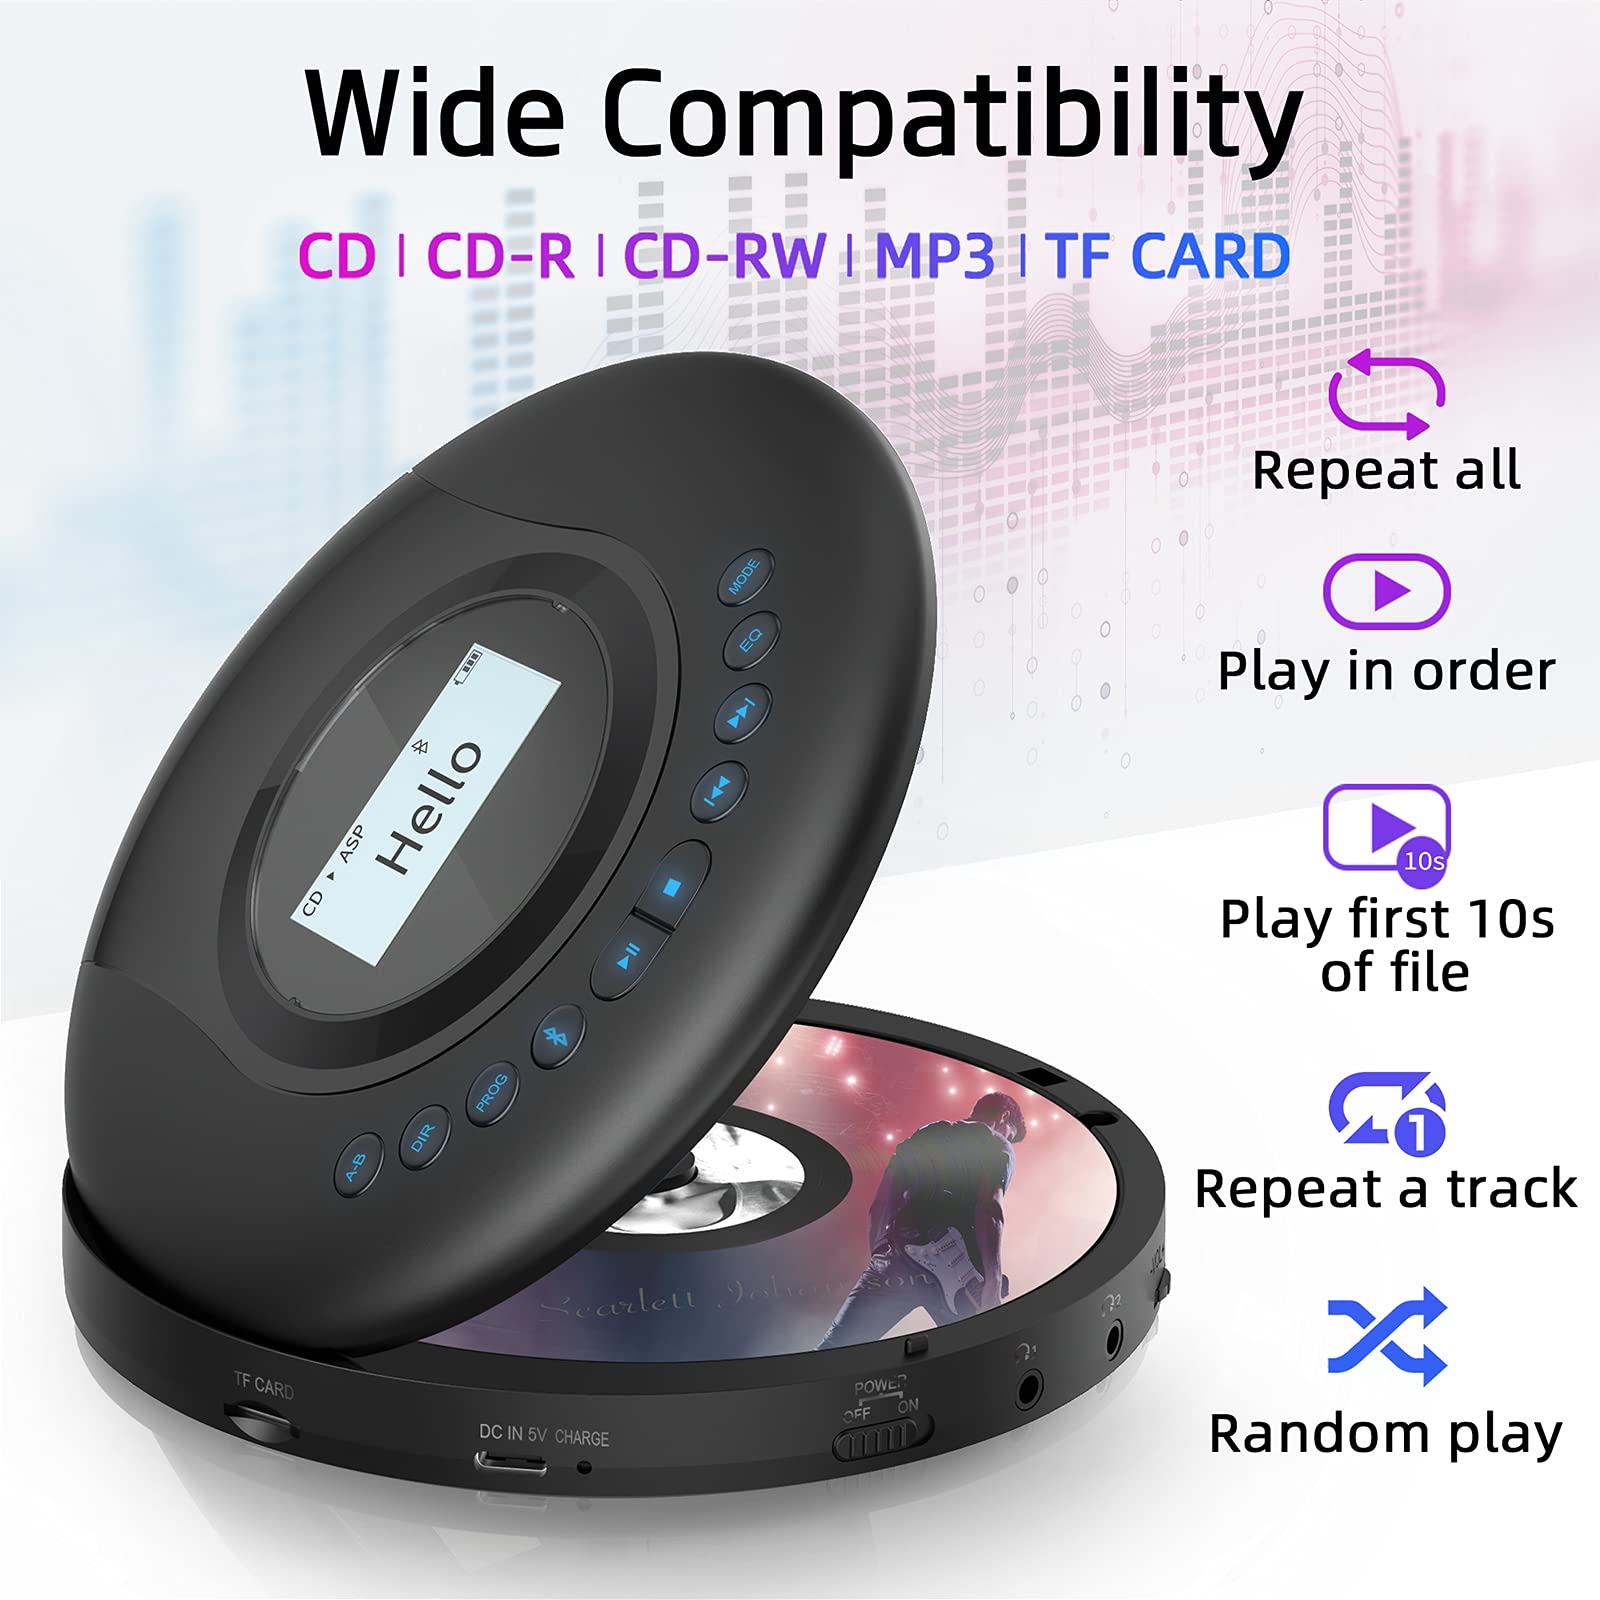 CD Player Portable with Bluetooth, ARAFUNA Bluetooth Device Visualization CD Player for car, 2000mAh Rechargeable Portable CD Player with Dot Matrix Text, Anti Shock Protection and Headphone (black)